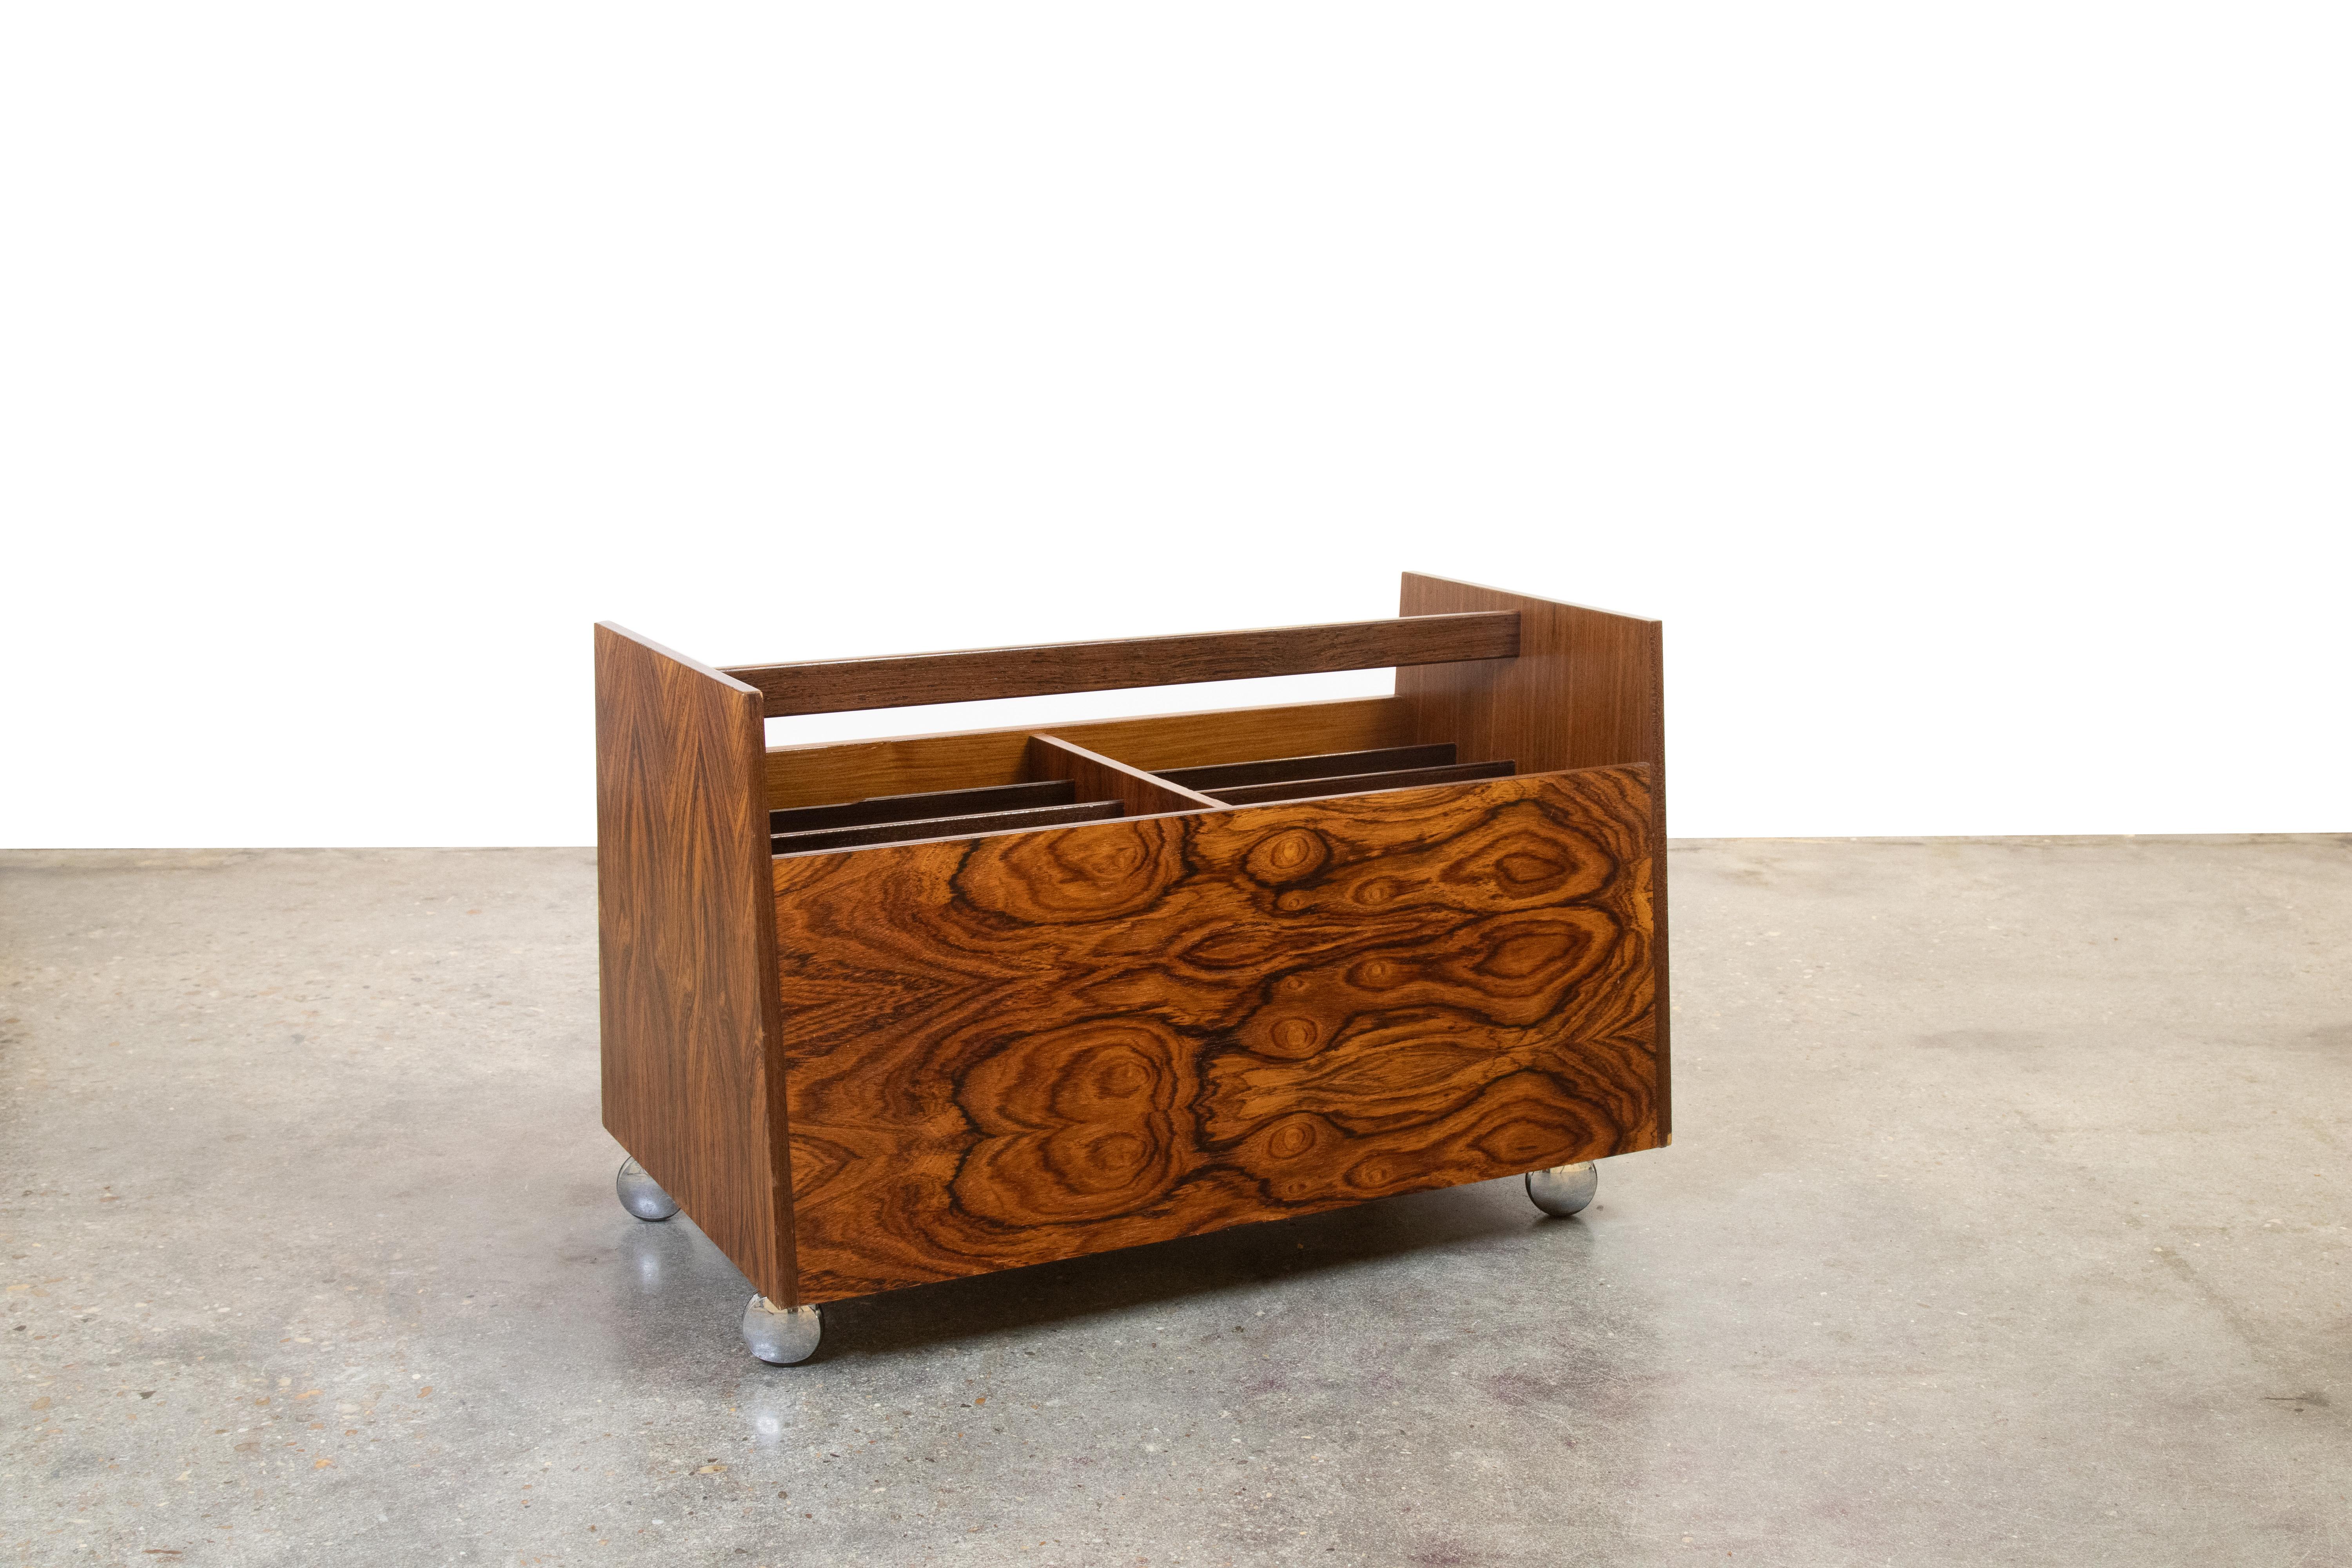 A versatile cart designed by Rolf Hesland for Bruksbo in the 1960’s. Originally designed for storing magazines and books, the now common usage is for storing your vintage record Vinyl LP collection. This example with the most expressive rosewood